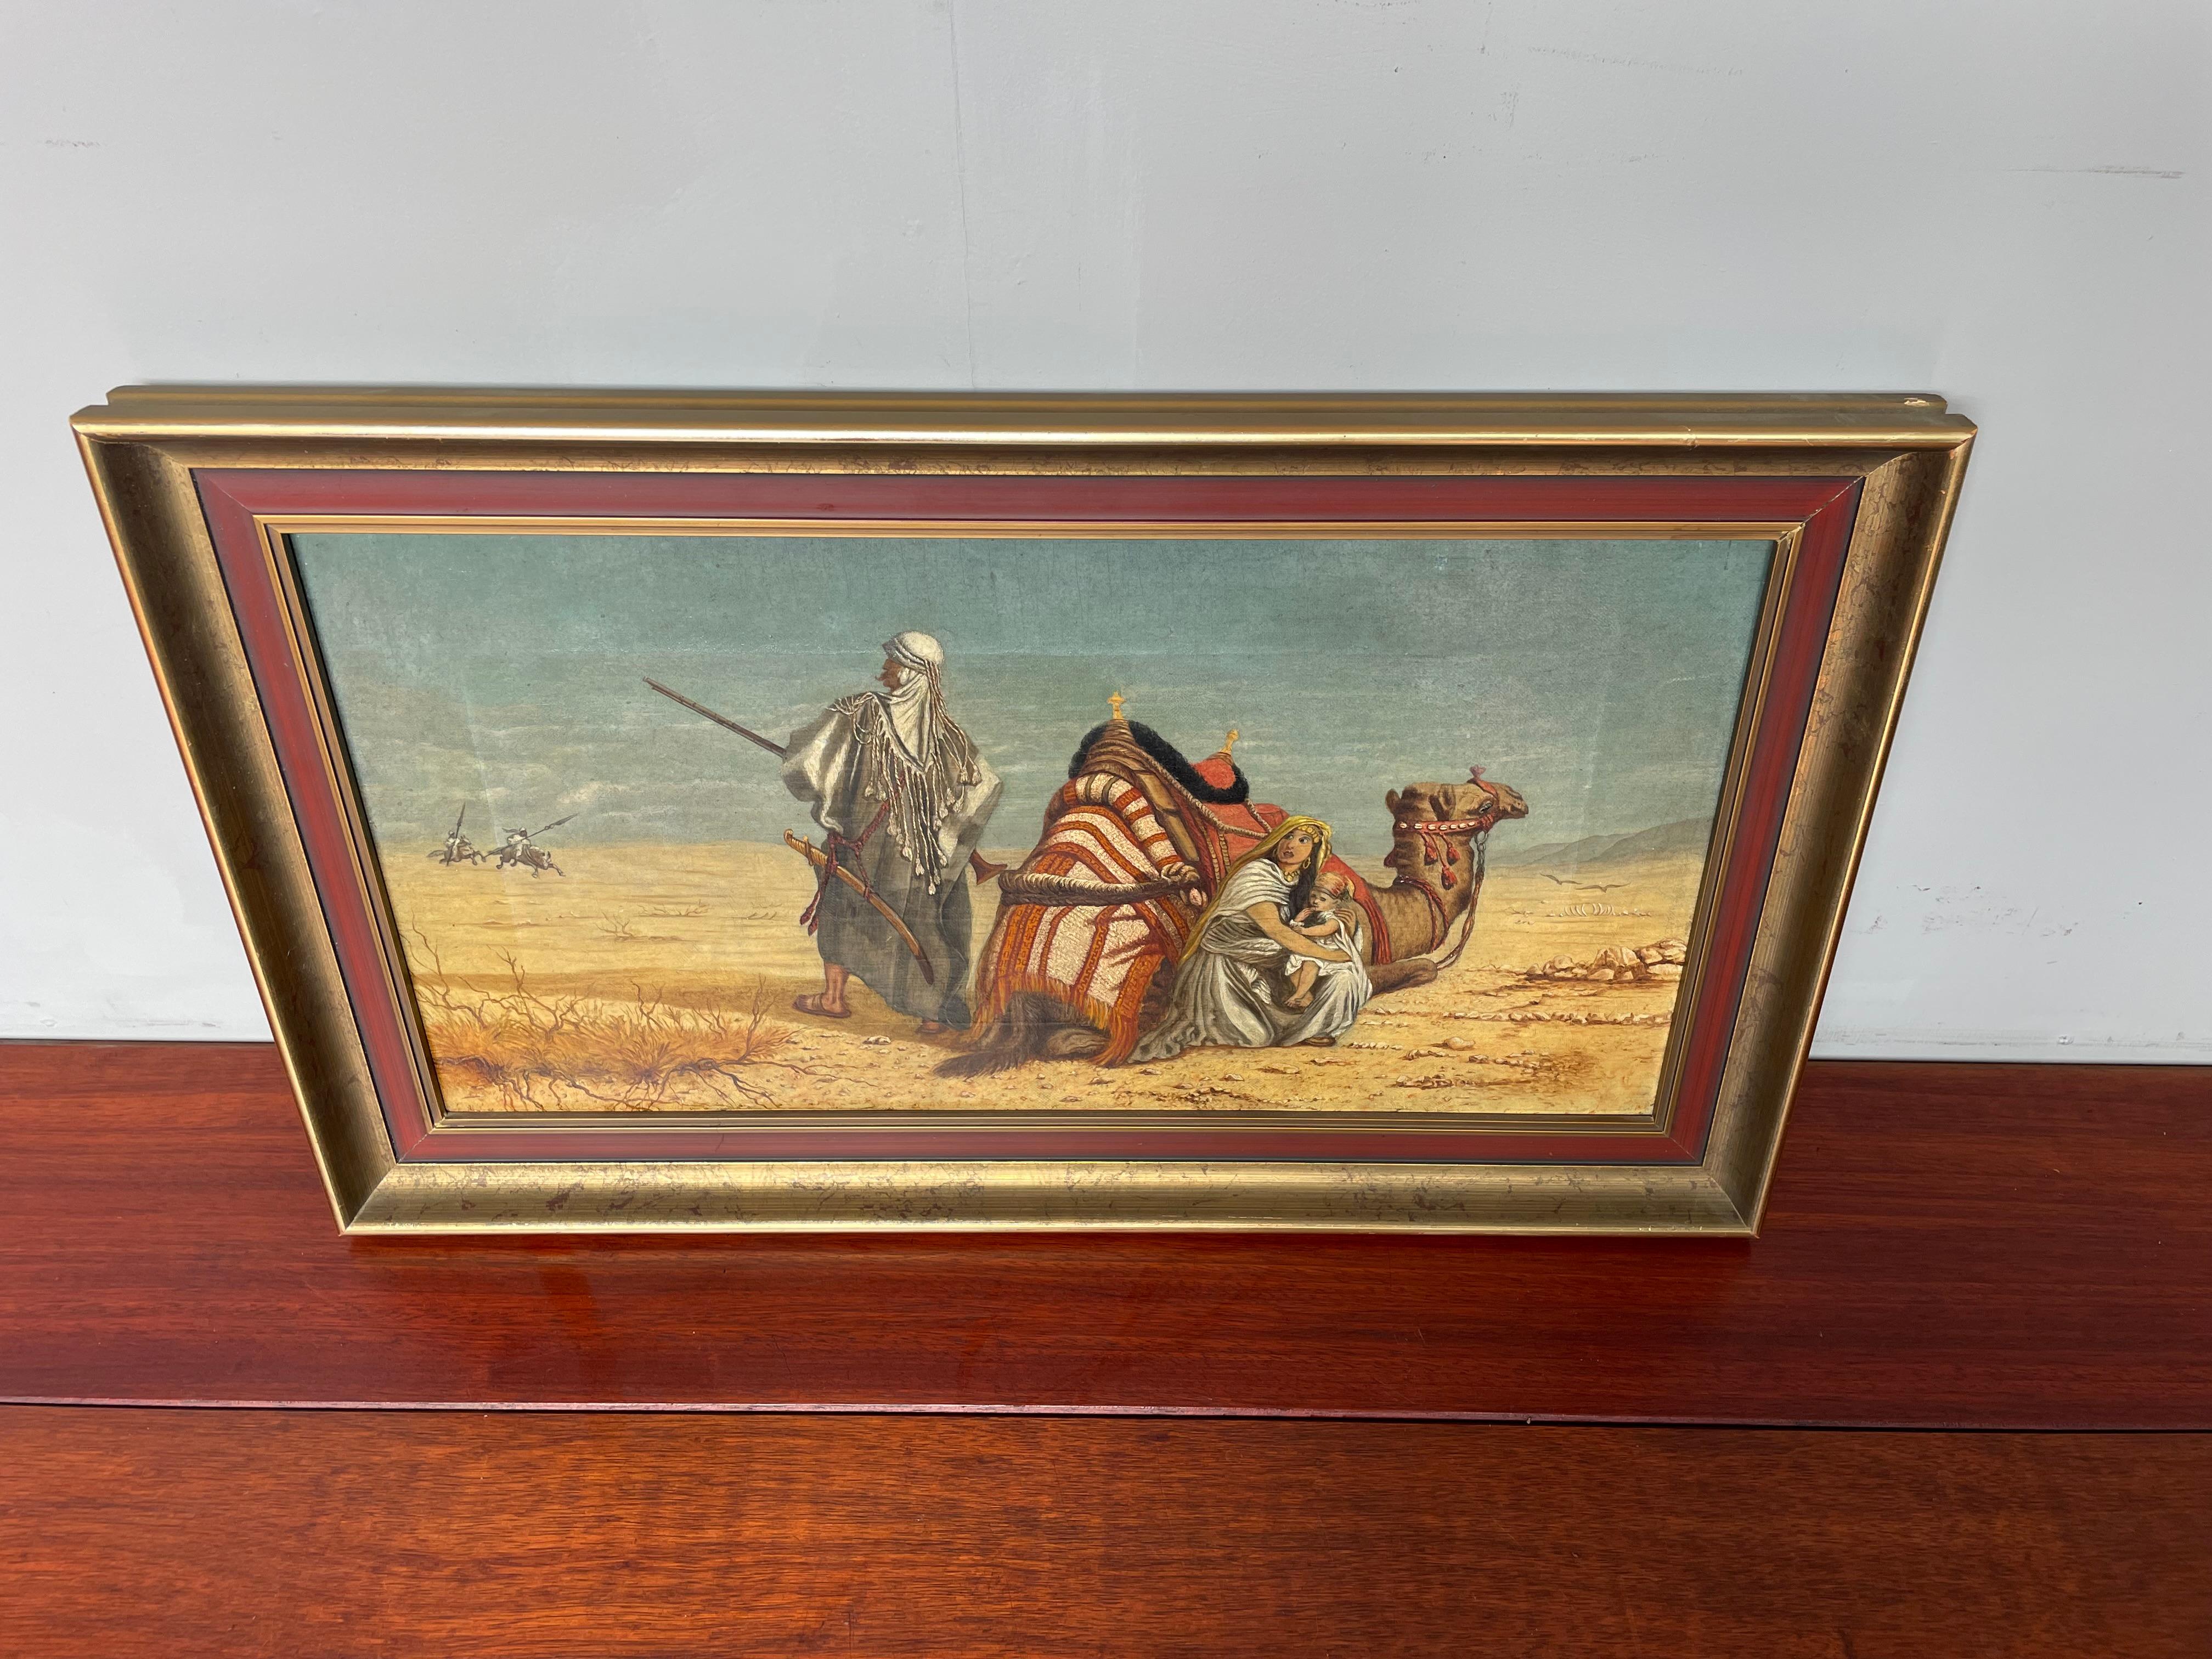 Antiquities Oil on Canvas Painting Arabic Male & Camel in Desert Protecting Spouse en vente 7